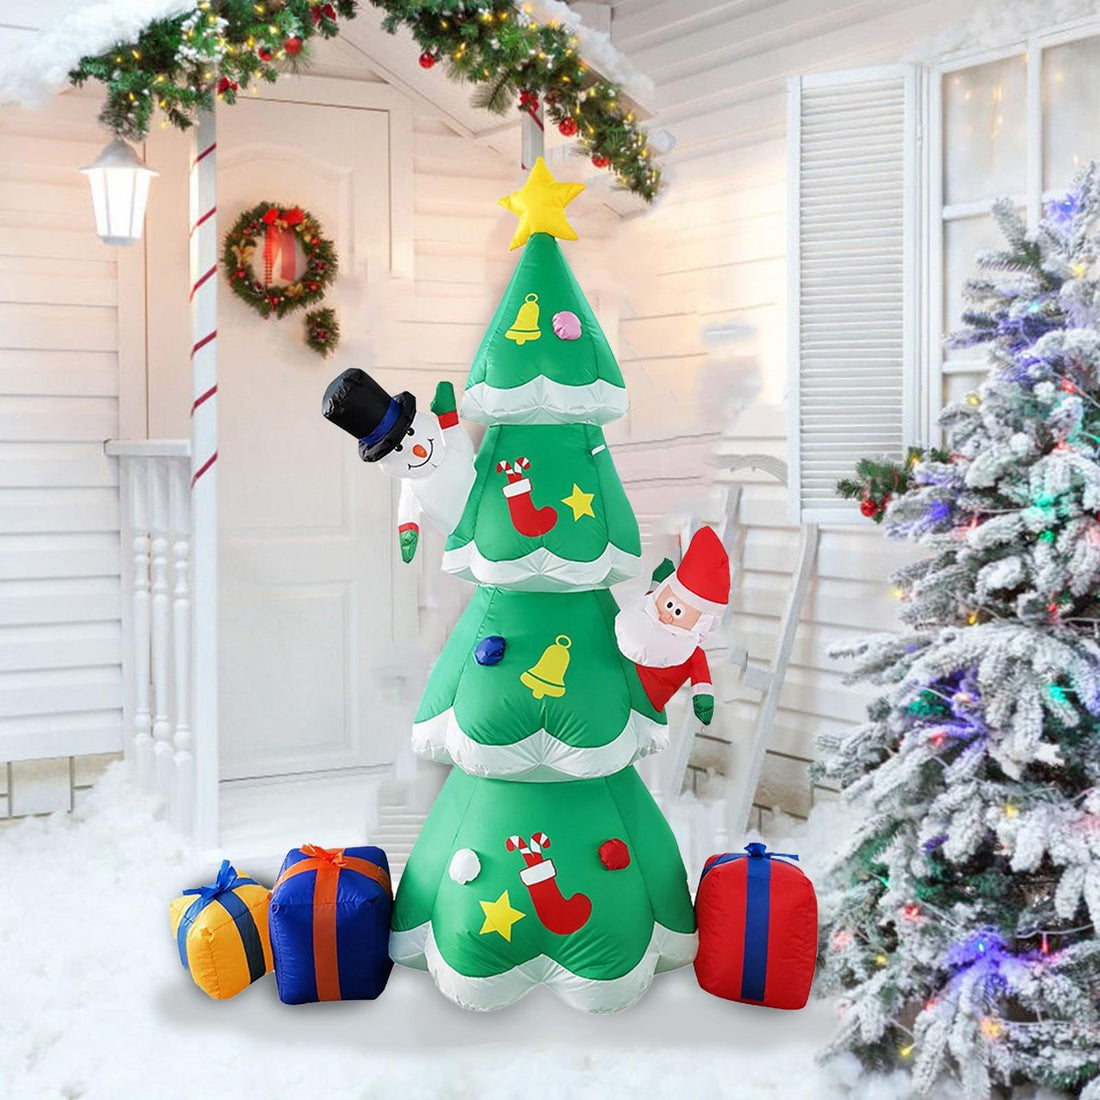 7 Ft Inflatables Christmas Tree with Color Changing LED Lights Decorations, Christmas Party Decor for Indoor Outdoor Yard,Green